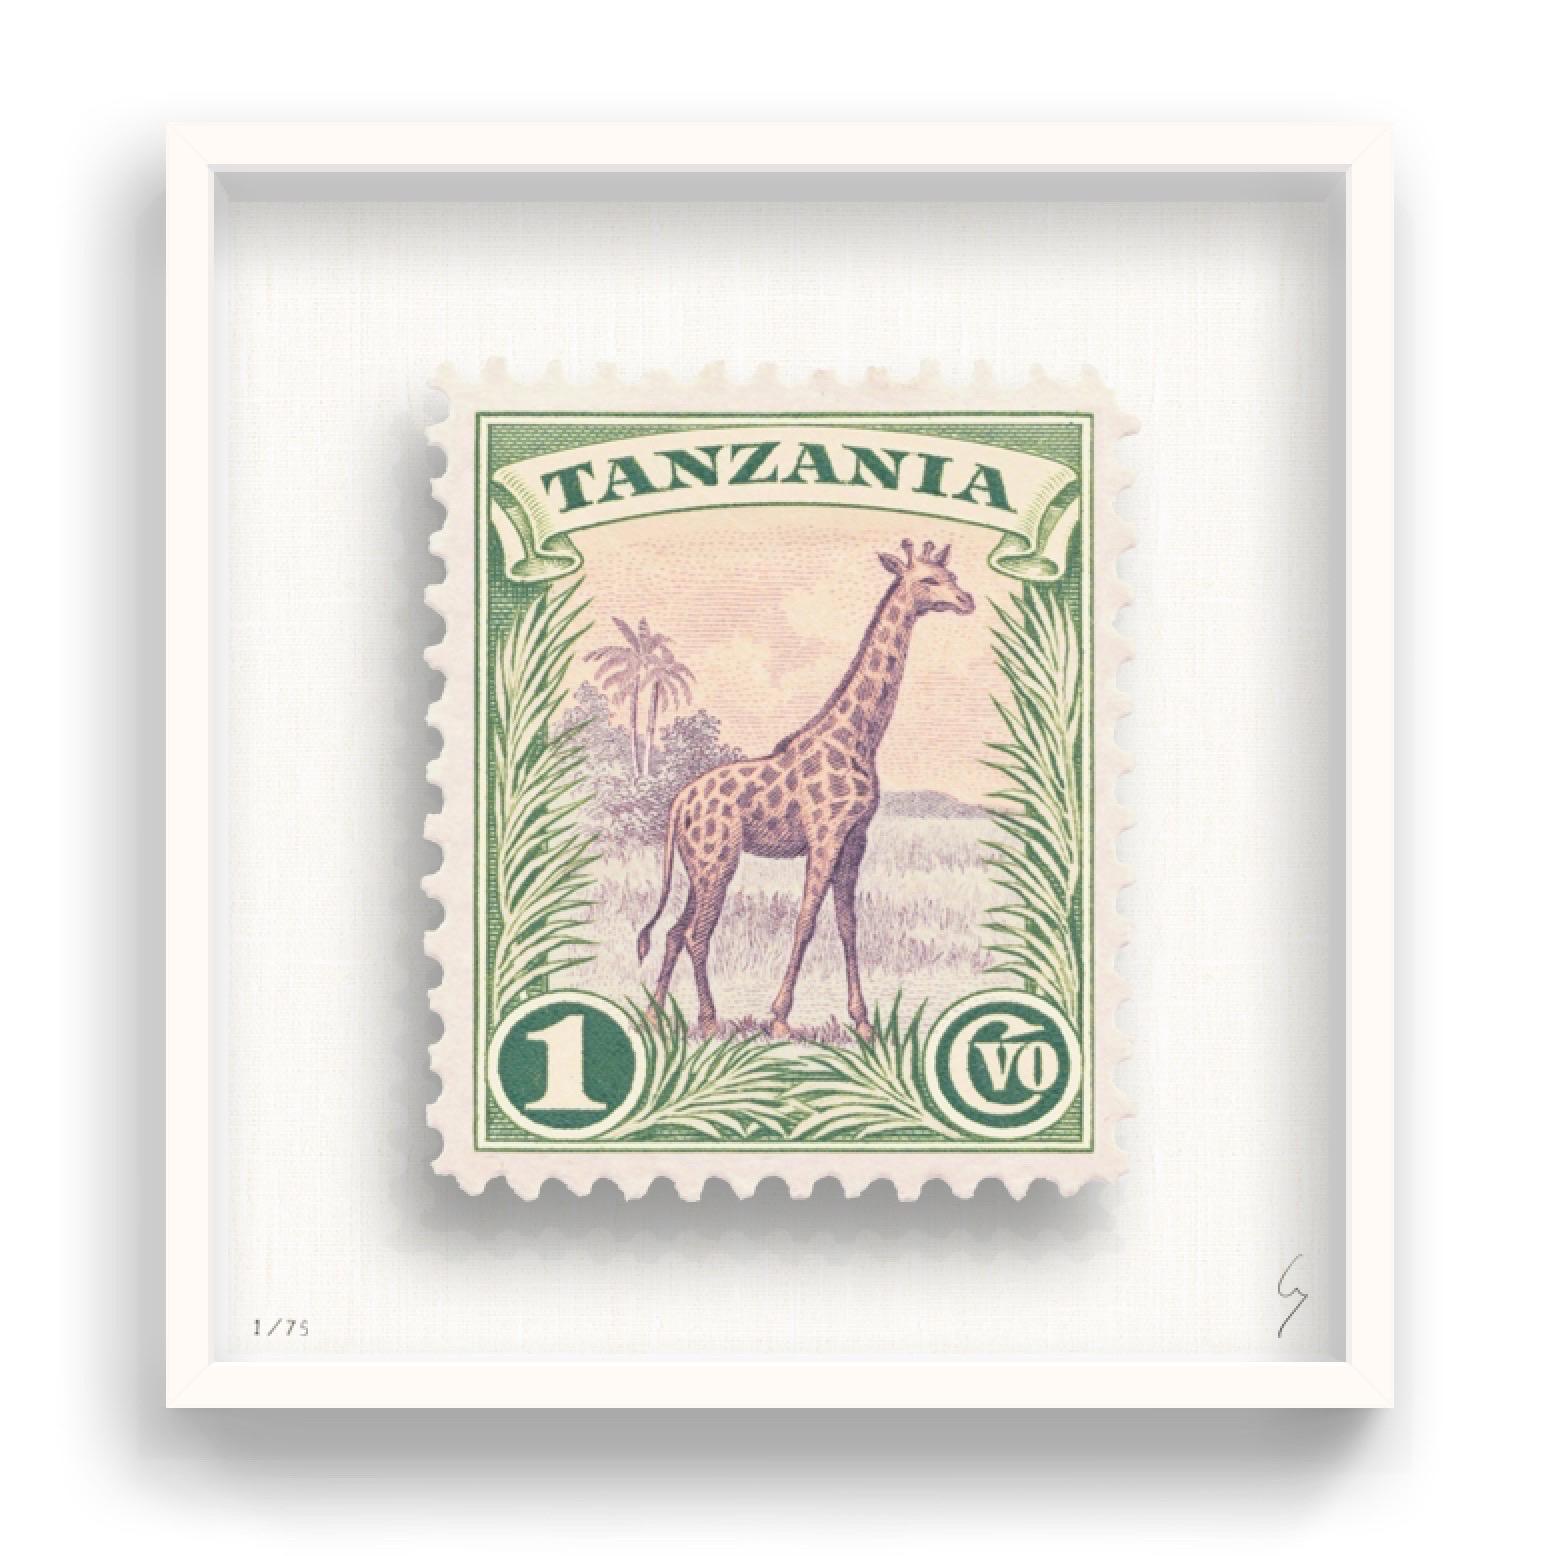 Guy Gee, Tanzania (medium)

Hand-engraved print on 350gsm on G.F Smith card
31 x 35 cm (12 1/5 x 13 4/5)
Frame included 
Edition of 75 

Each artwork by Guy had been digitally reimagined from an original postage stamp. Cut out and finished by hand,